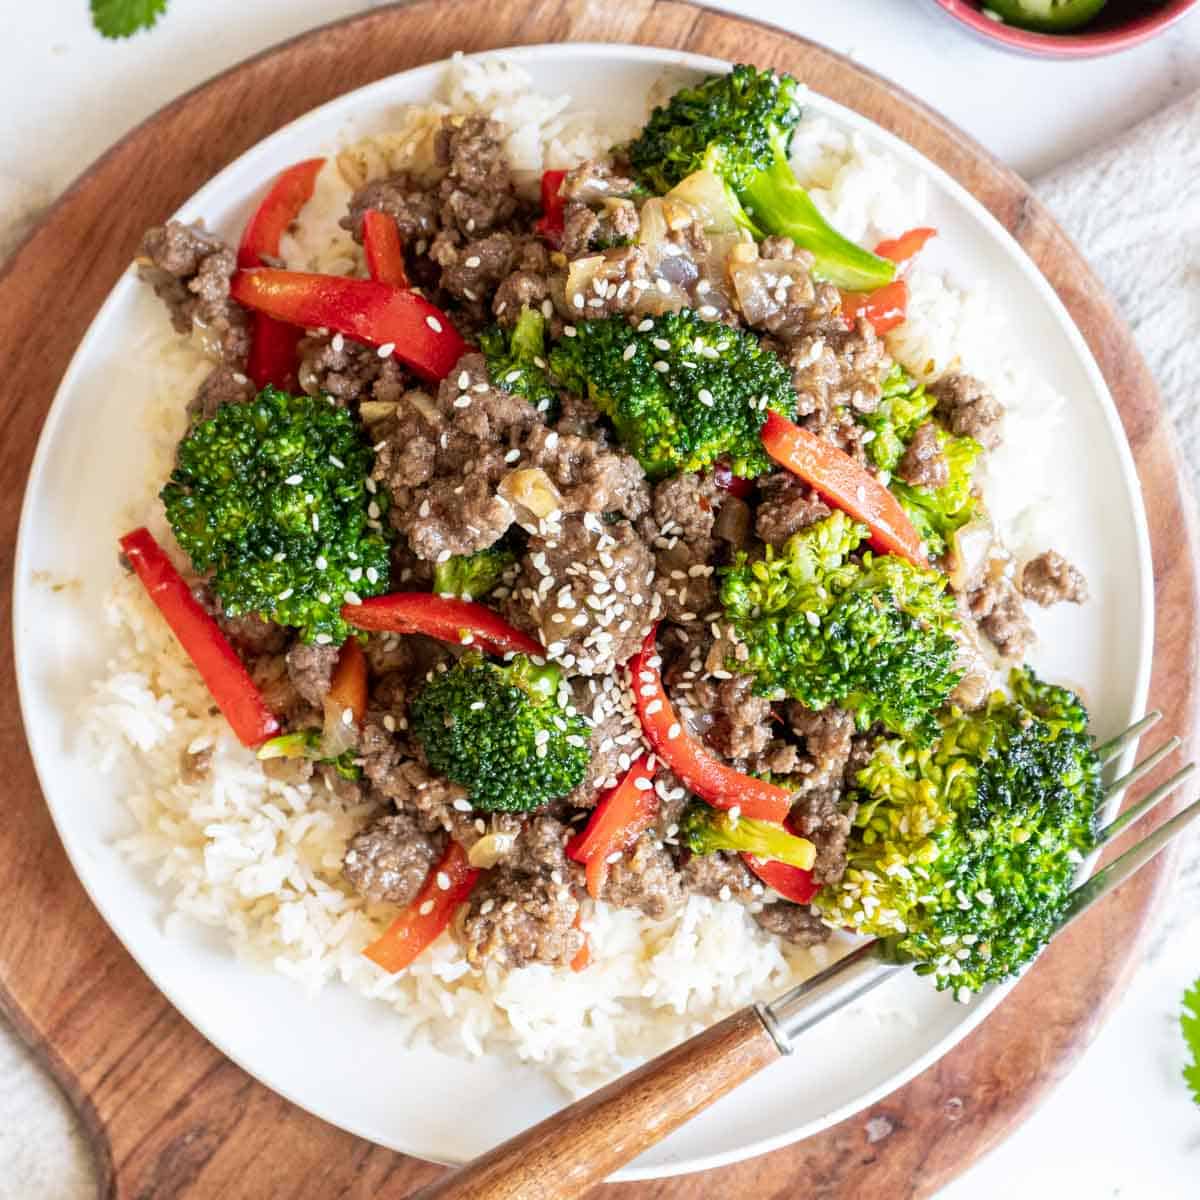 https://www.peelwithzeal.com/wp-content/uploads/2023/04/ground-beef-and-broccoli.jpg